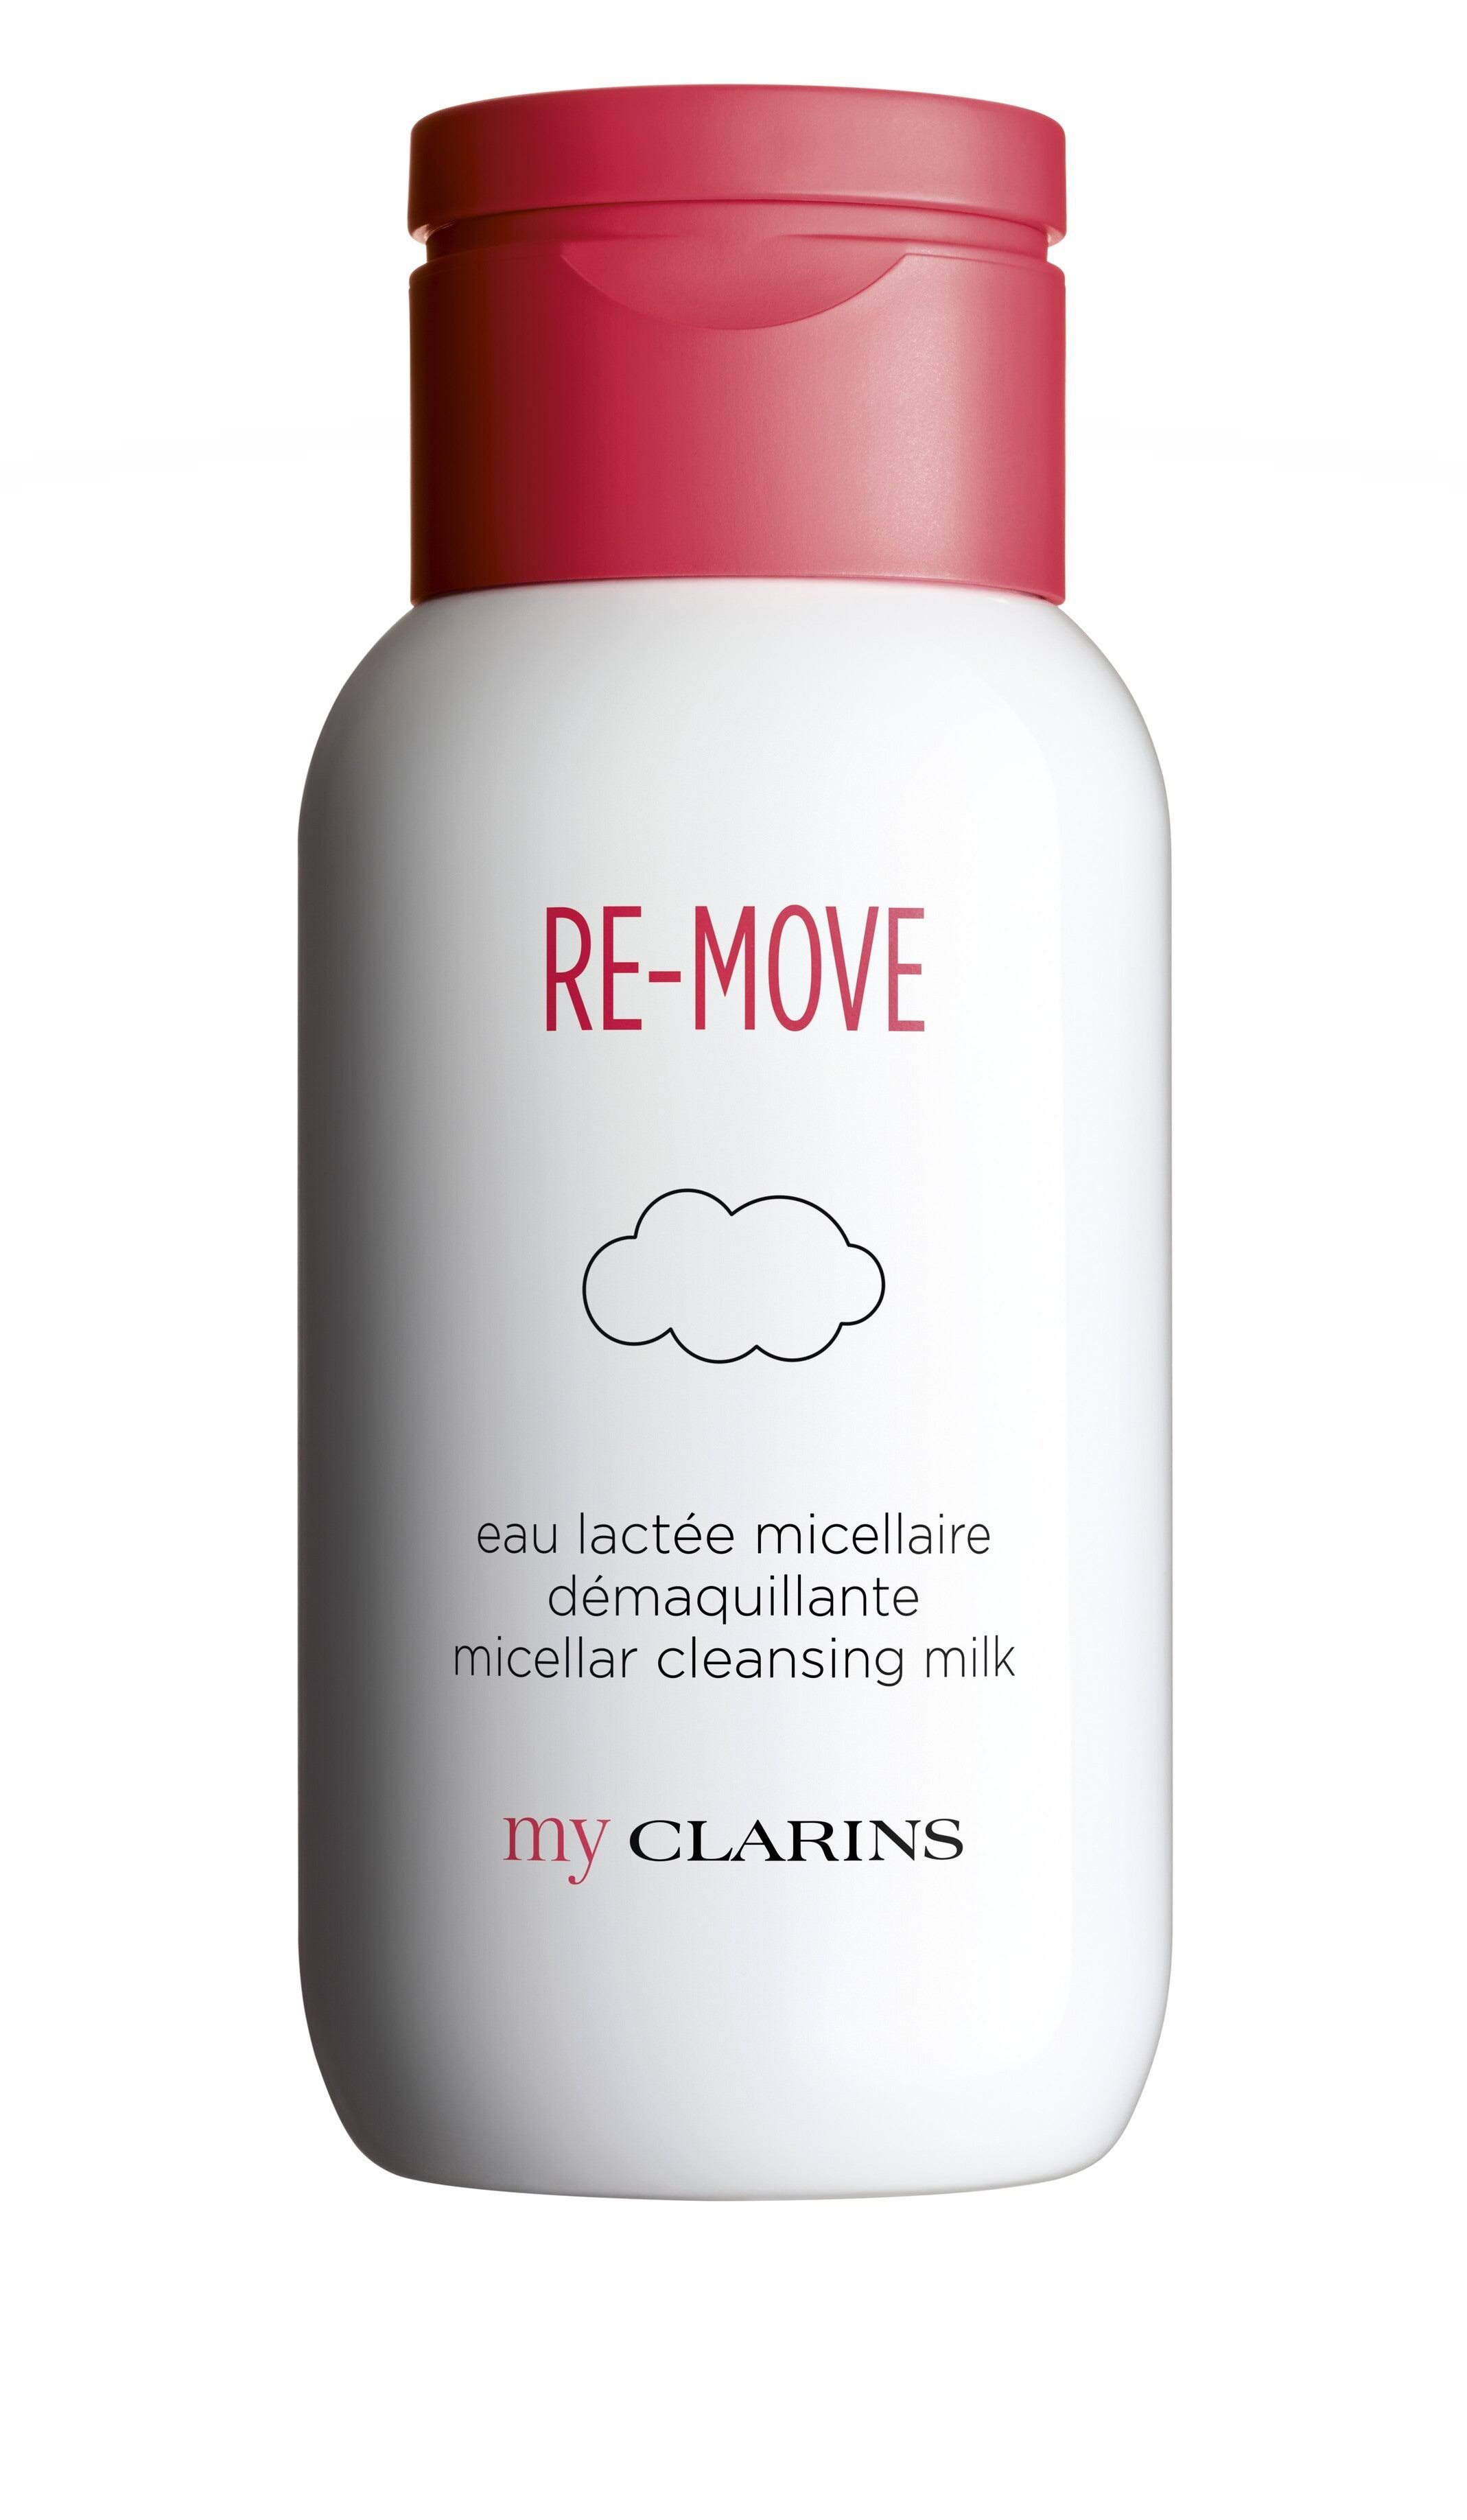 My Clarins Re-Move Micellar Cleansing Milk 200 Ml